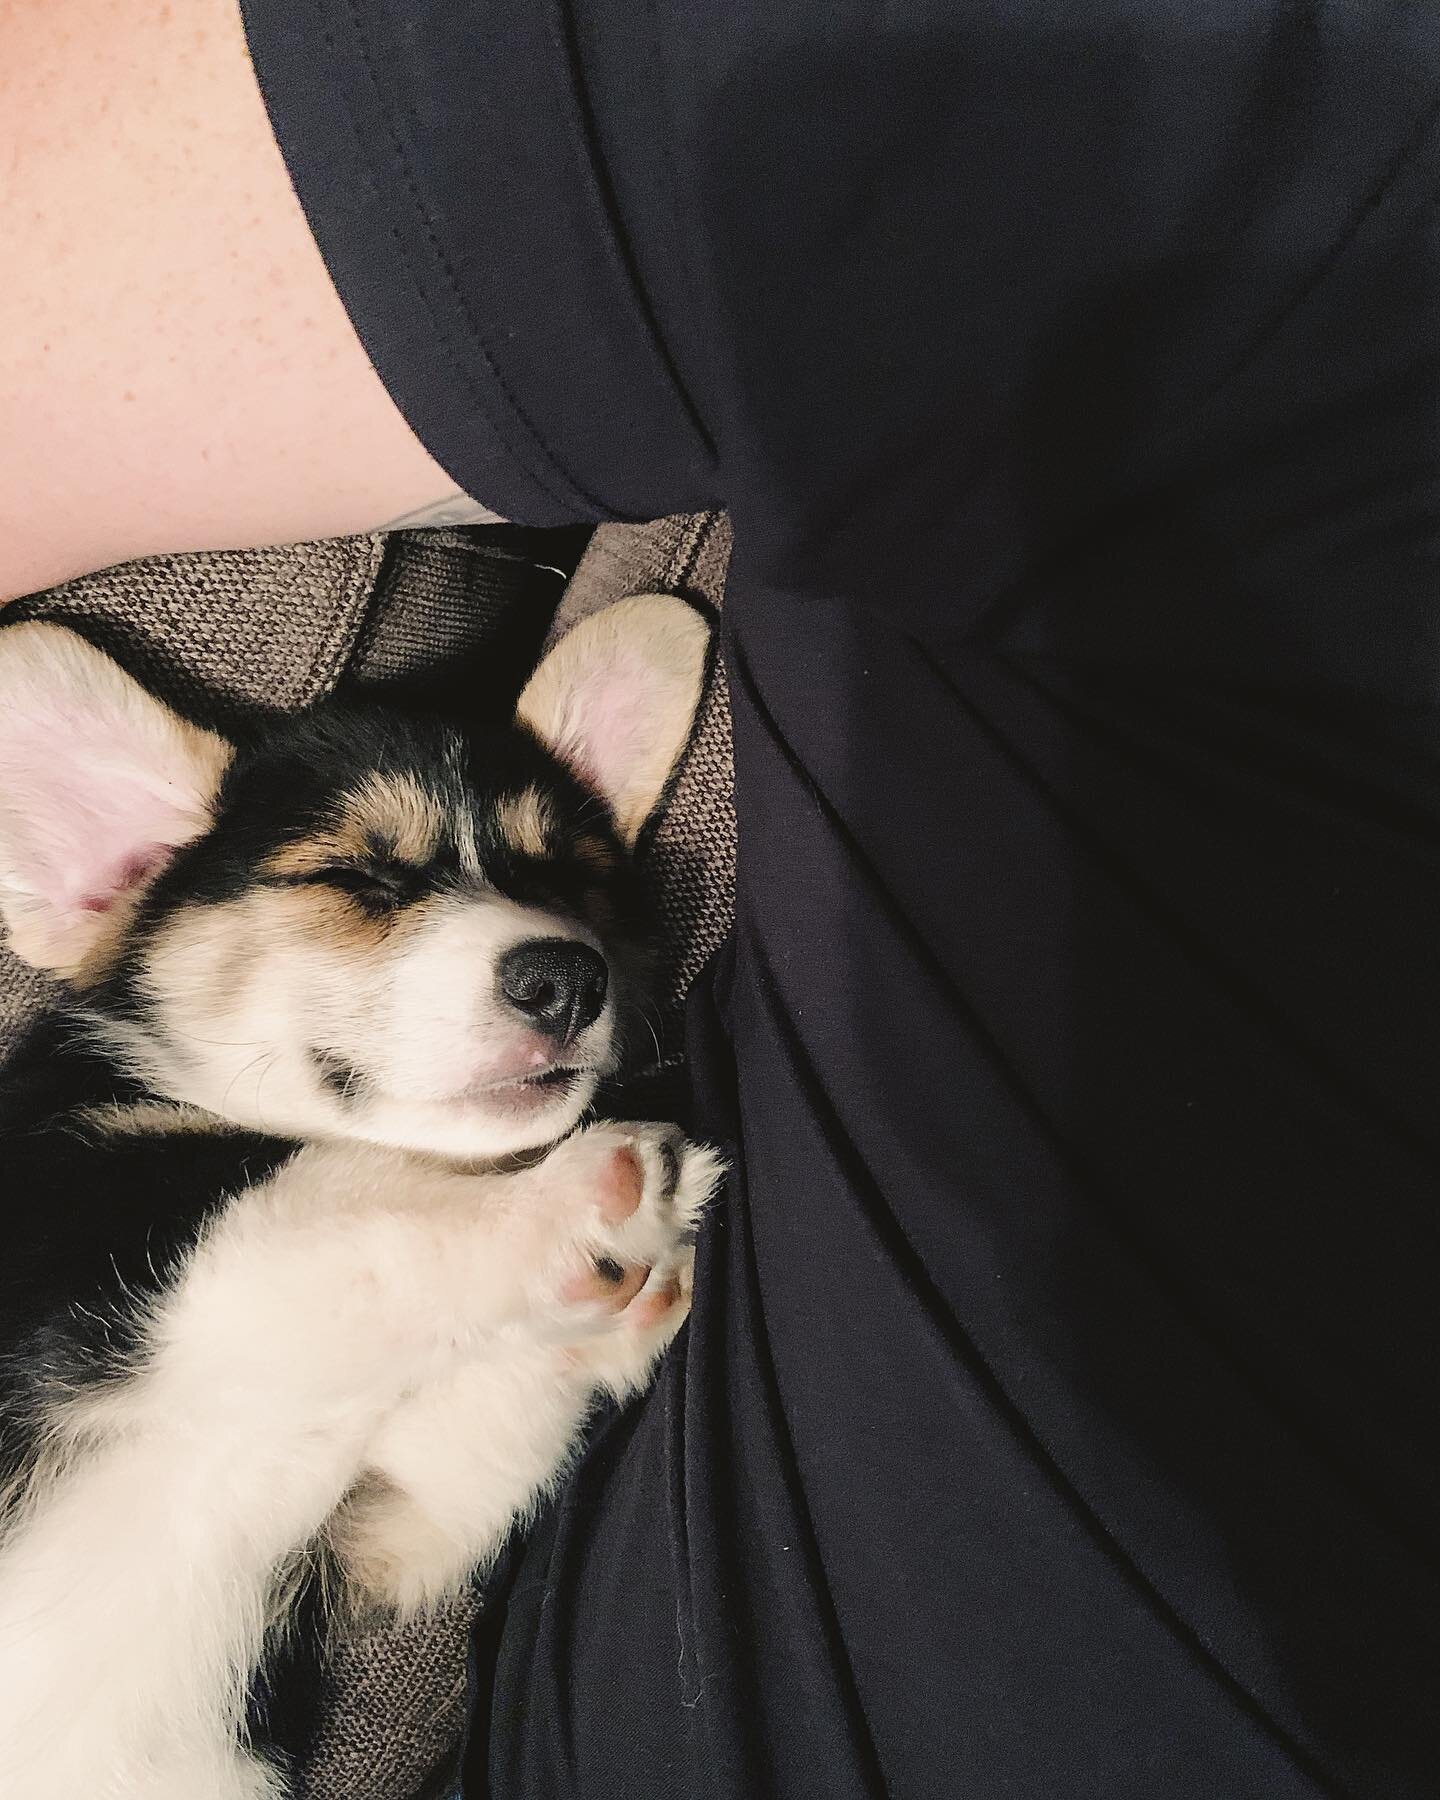 meet rodeo. born 8/8, loves to snuggle, loves to chew up the grass, tirelessly trying to befriend jack. mostly loves being cute. 🤠 huge thanks to Amy + Nick @rockinhcorgis for making this little nugget ours! welcome home roadie!